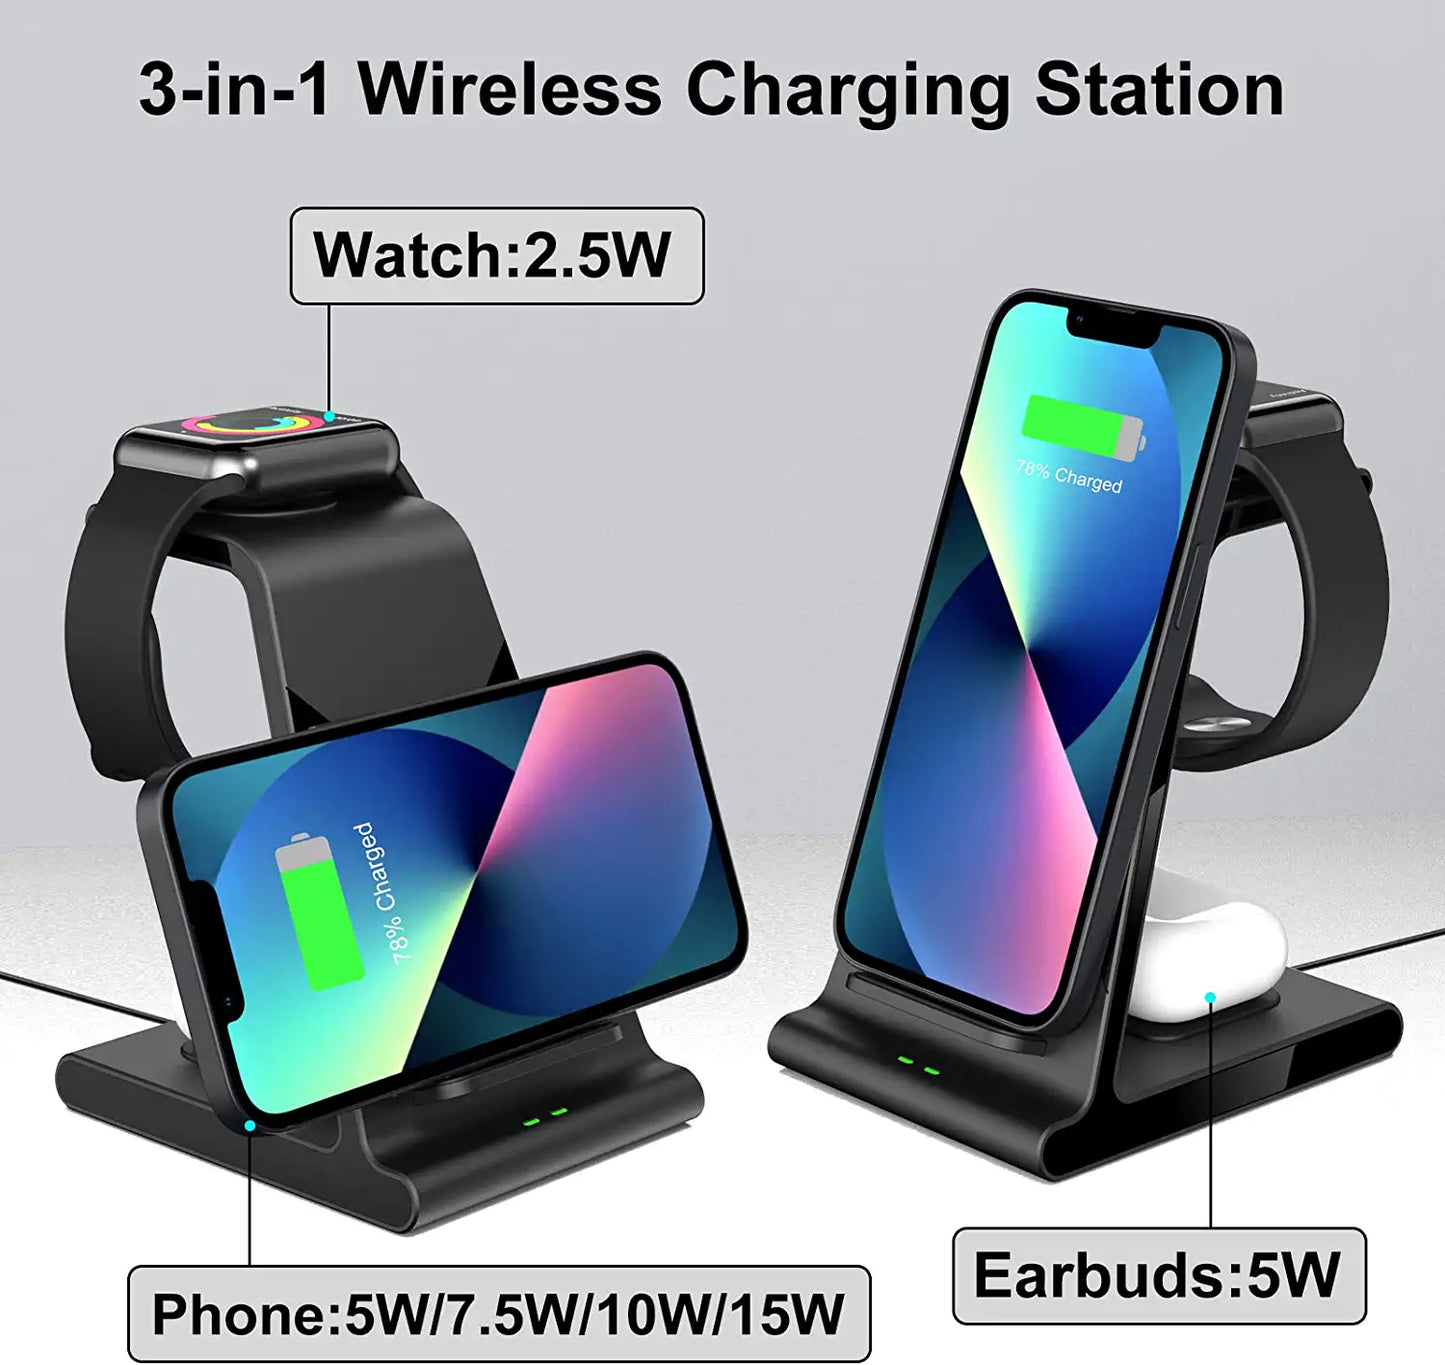 Aukvite 3 in 1 Wireless Charging Station Apple, Wireless Watch Charger Dock for Iwatch Series 7 6 5 4 3 2 and Airpods, Phone Charger Stand Compatible with Iphone 13 Pro Max 12 Pro Samsung S20(Black)